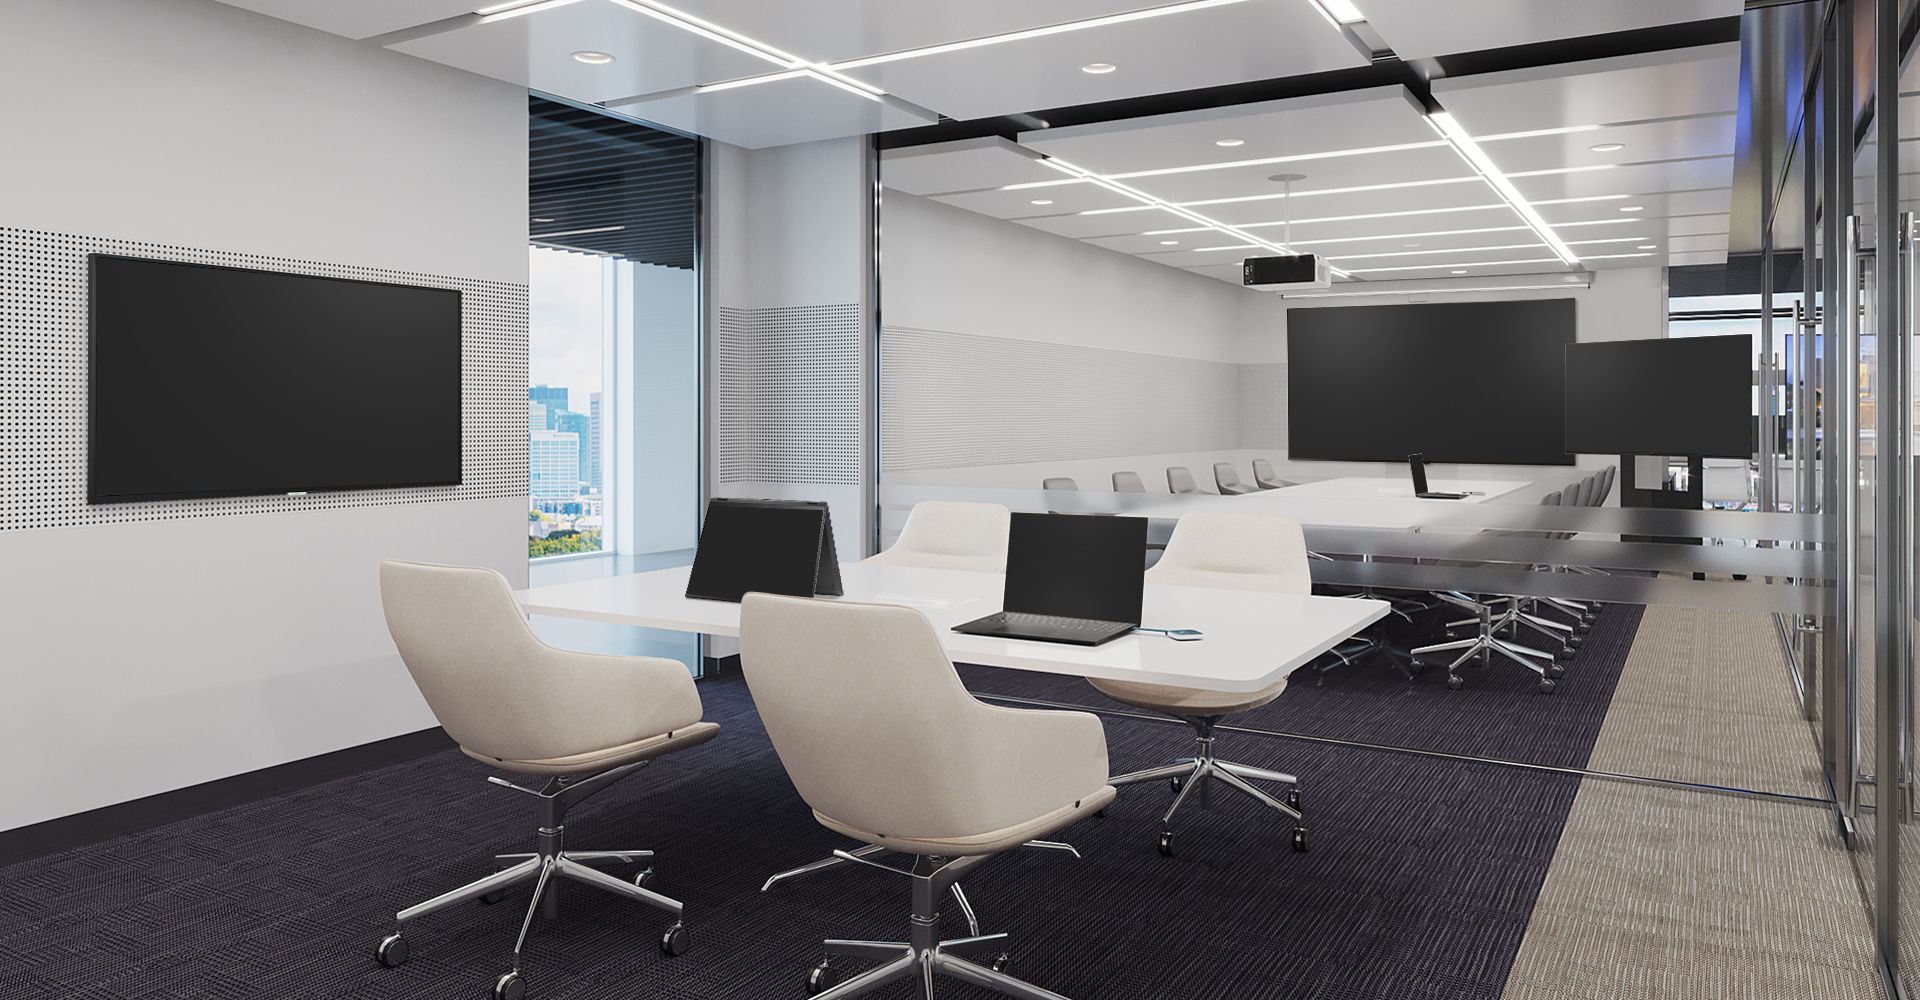 Explore how LG provides integrated solutions for meeting rooms in corporations.